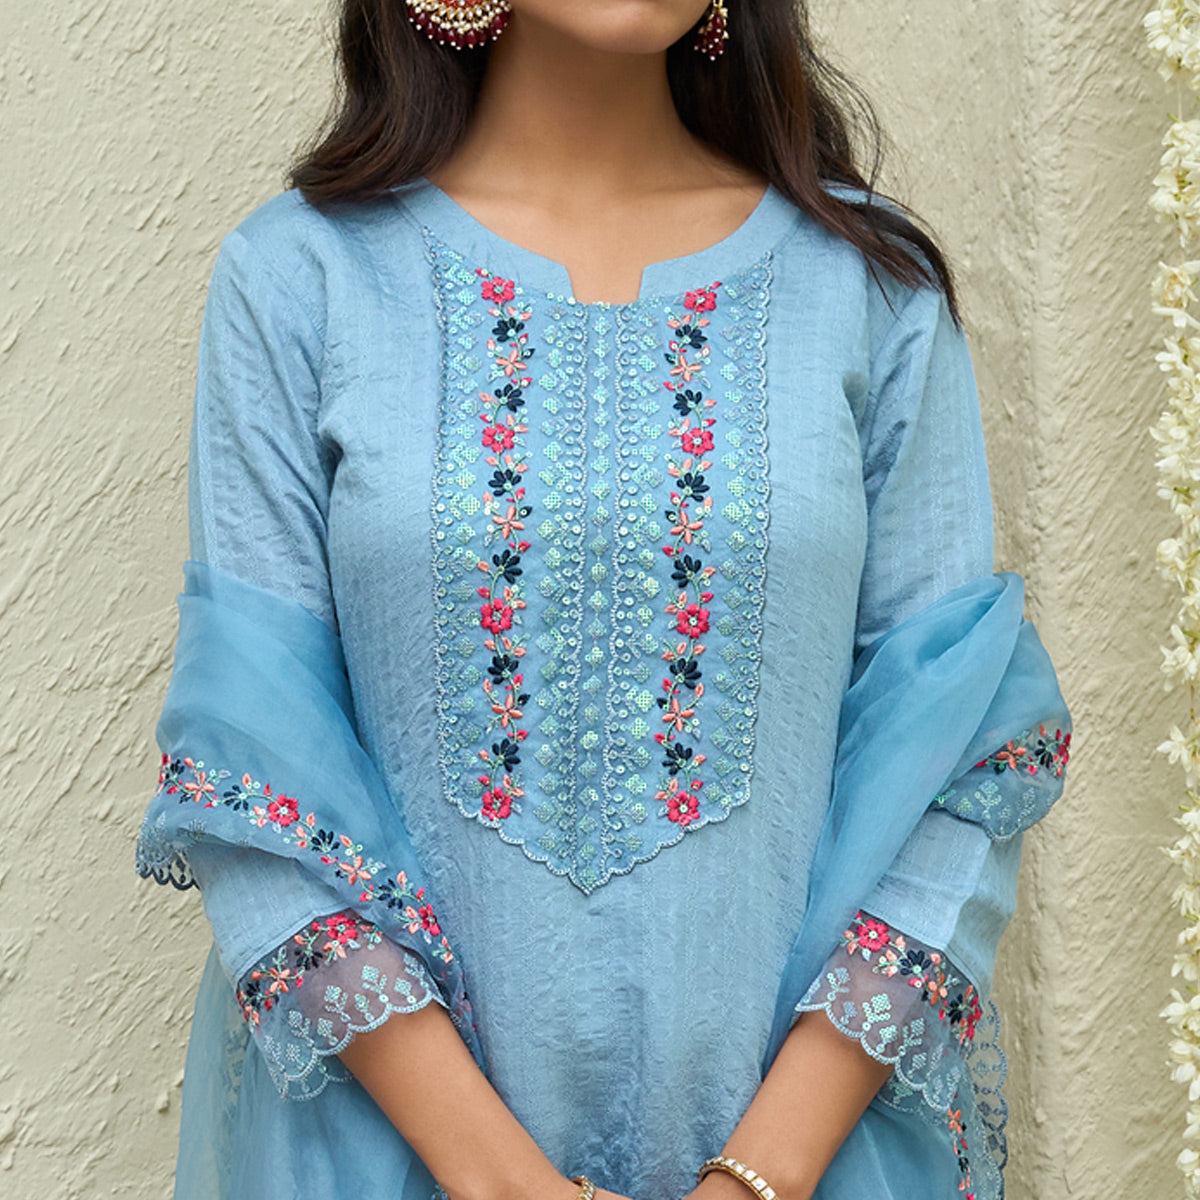 Blue Floral Embroidered Rayon Salwar Suit